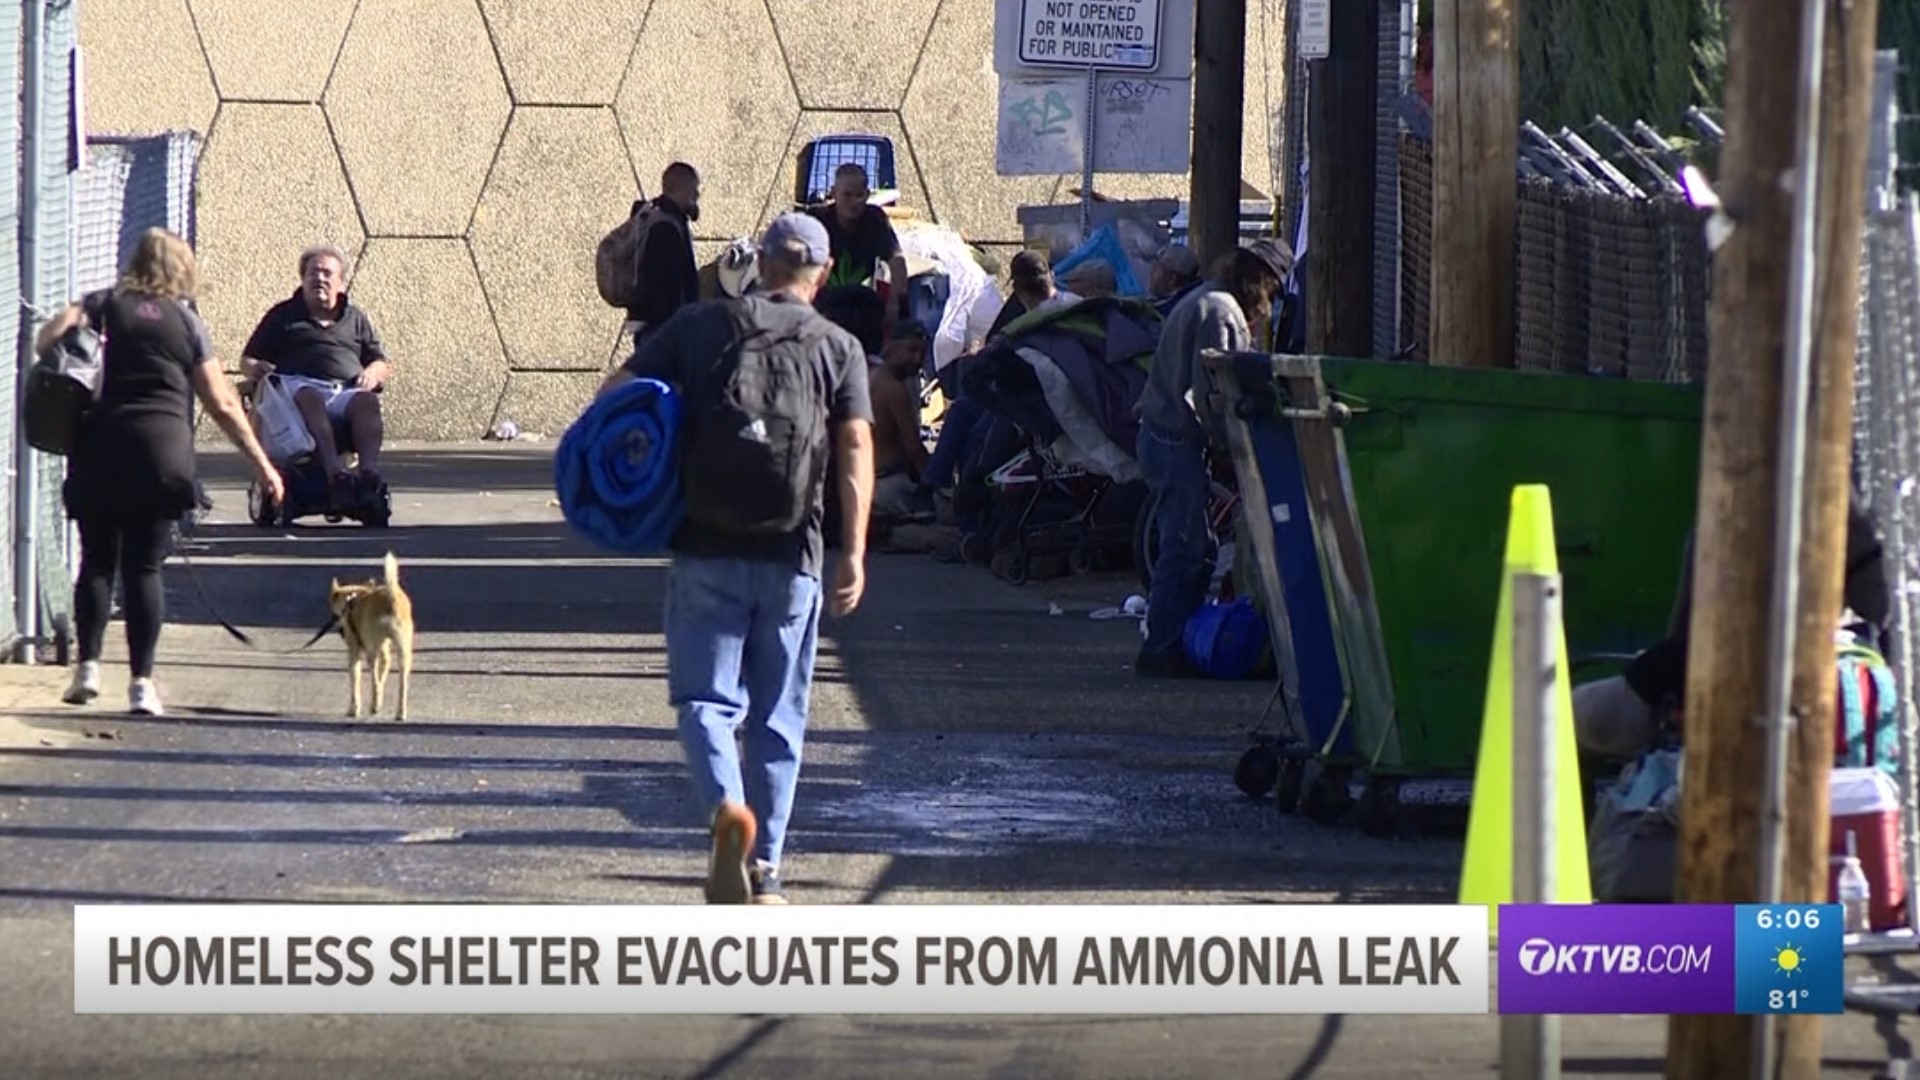 The homeless shelter had to evacuate 153 people from its building following a "Code Red" notification put out by Boise Fire due to an ammonia leak.